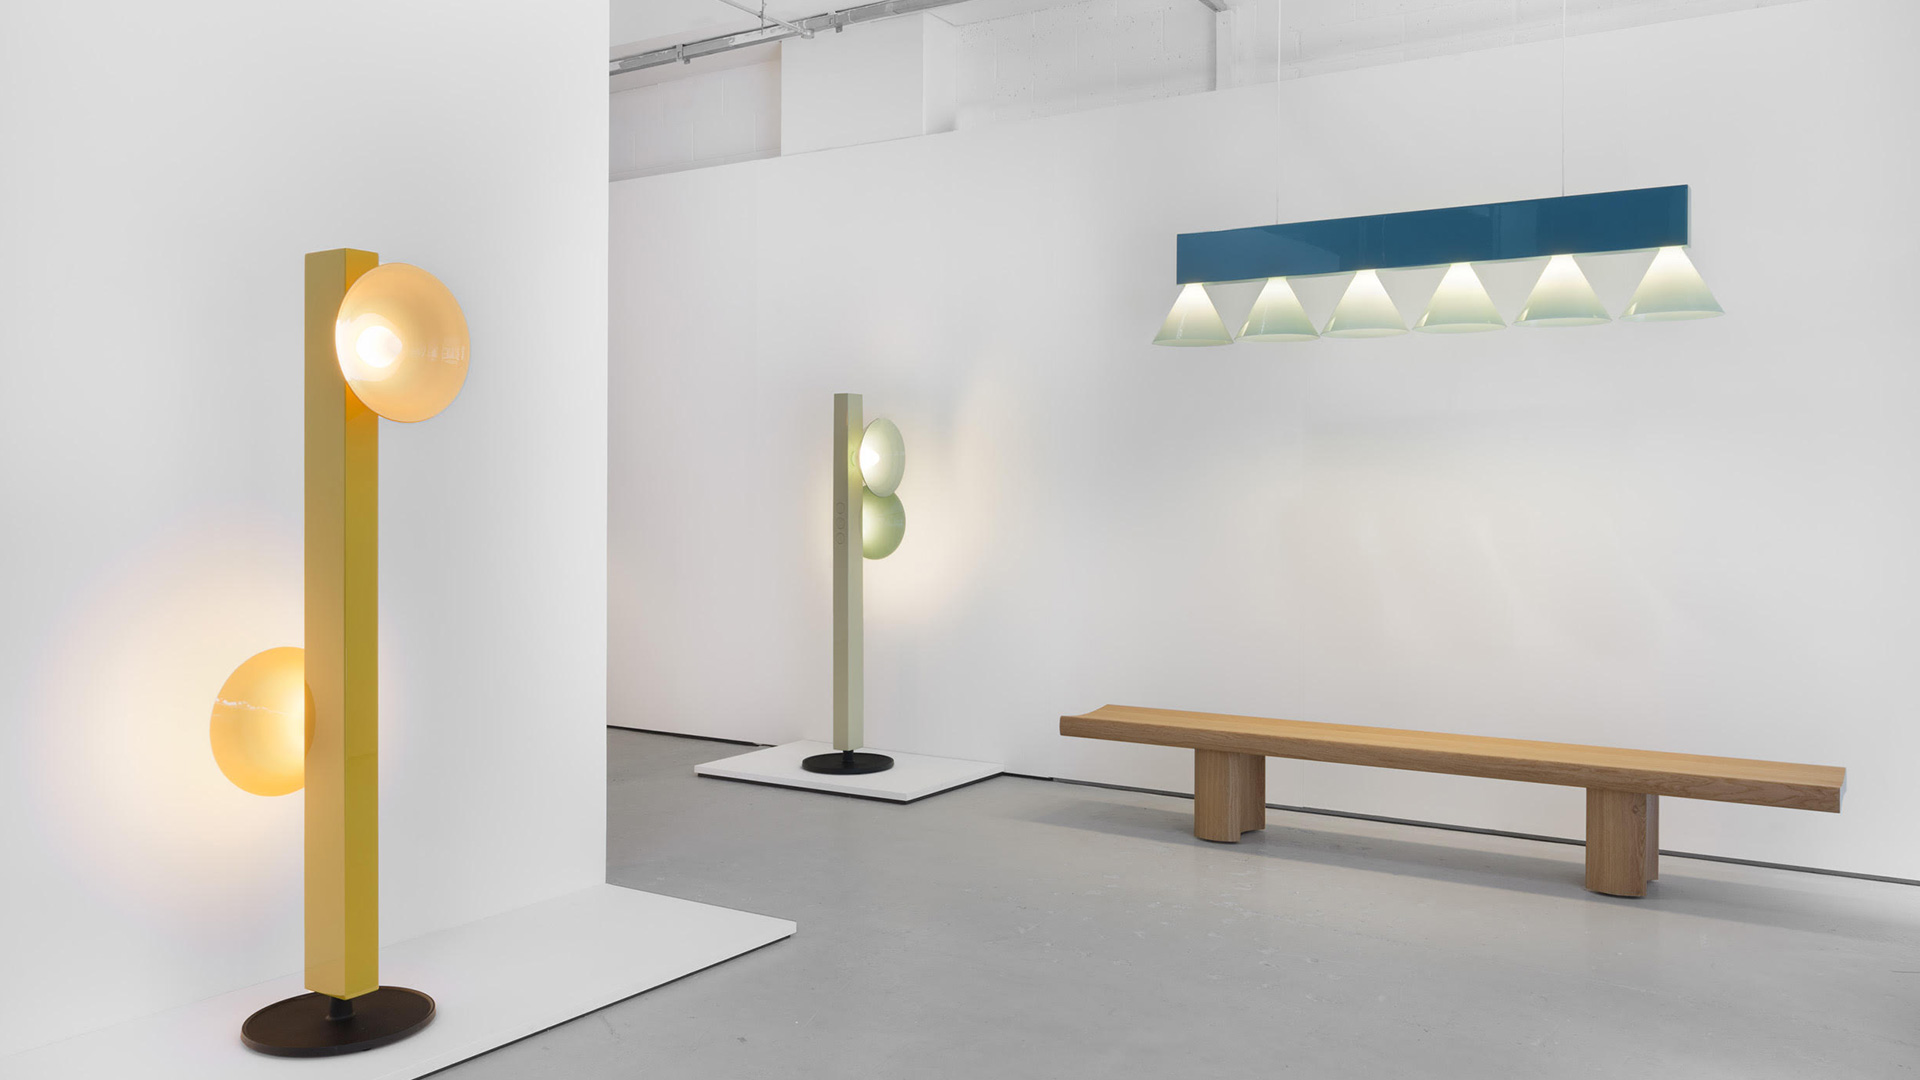 Signals by Edward Barber and Jay Osgerby at Galerie kreo